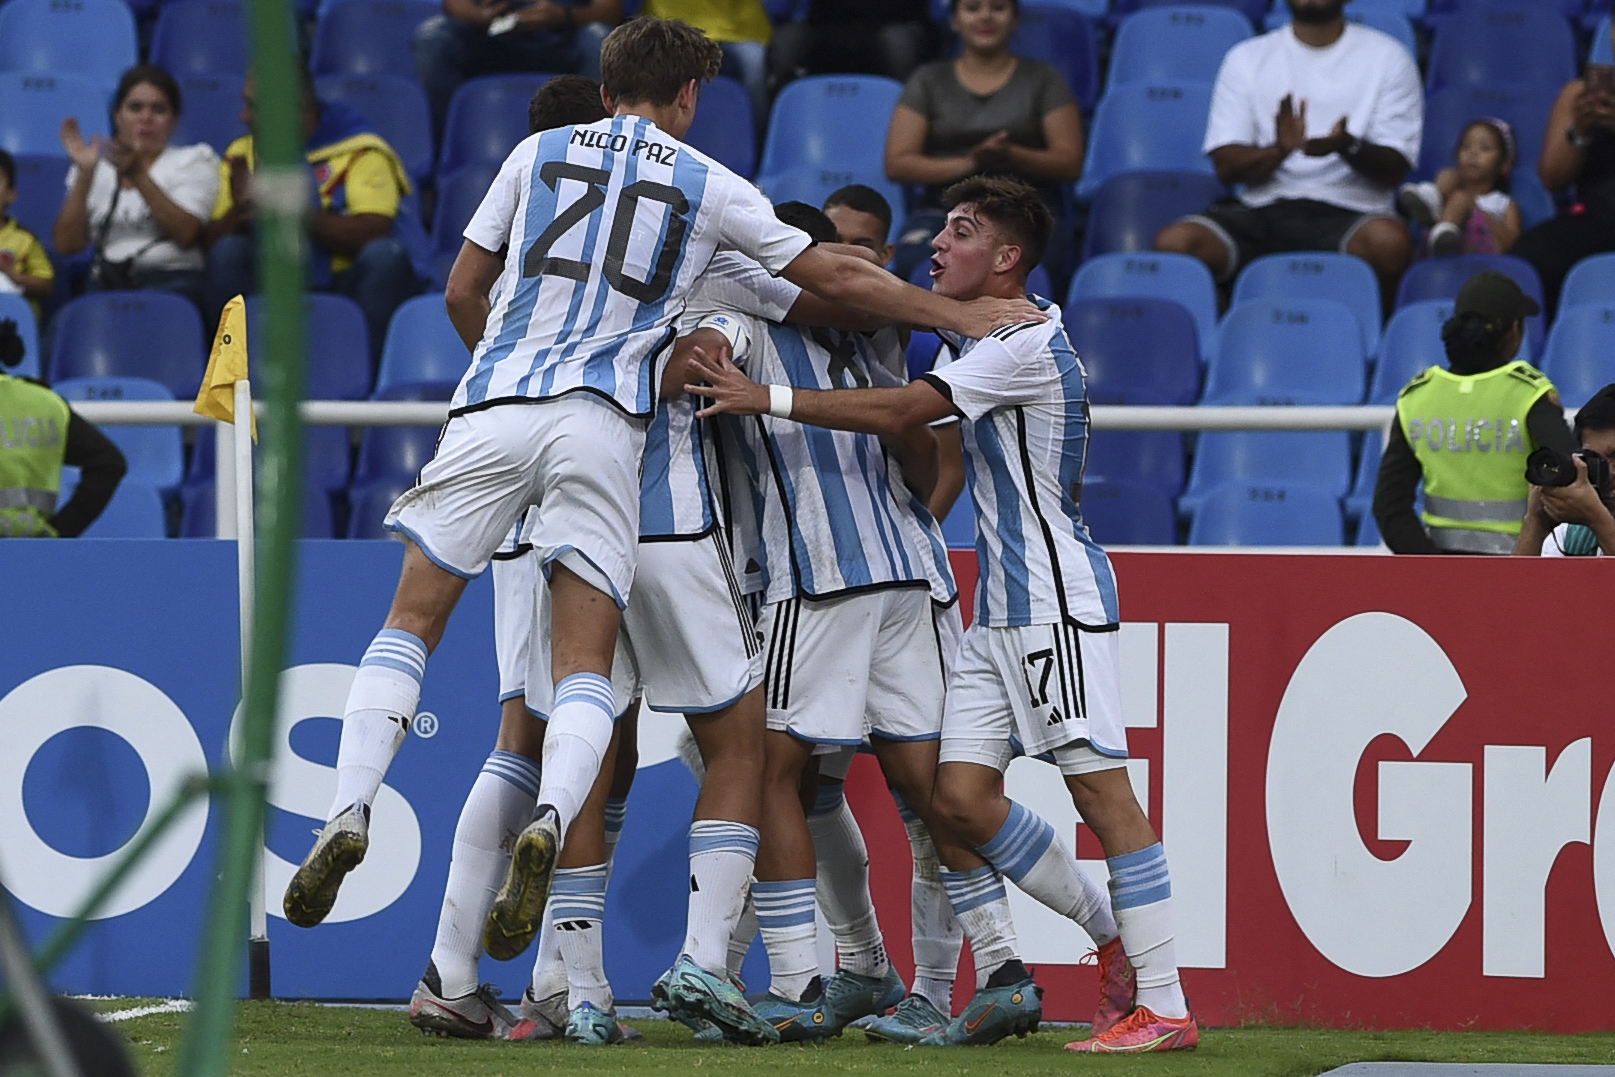 Argentina's players celebrate Gino Infantino's goal against Peru during their South American U-20 first round football match at the Pascual Guerrero stadium in Cali, Colombia, on January 25, 2023. (Photo by JOAQUIN SARMIENTO / AFP)